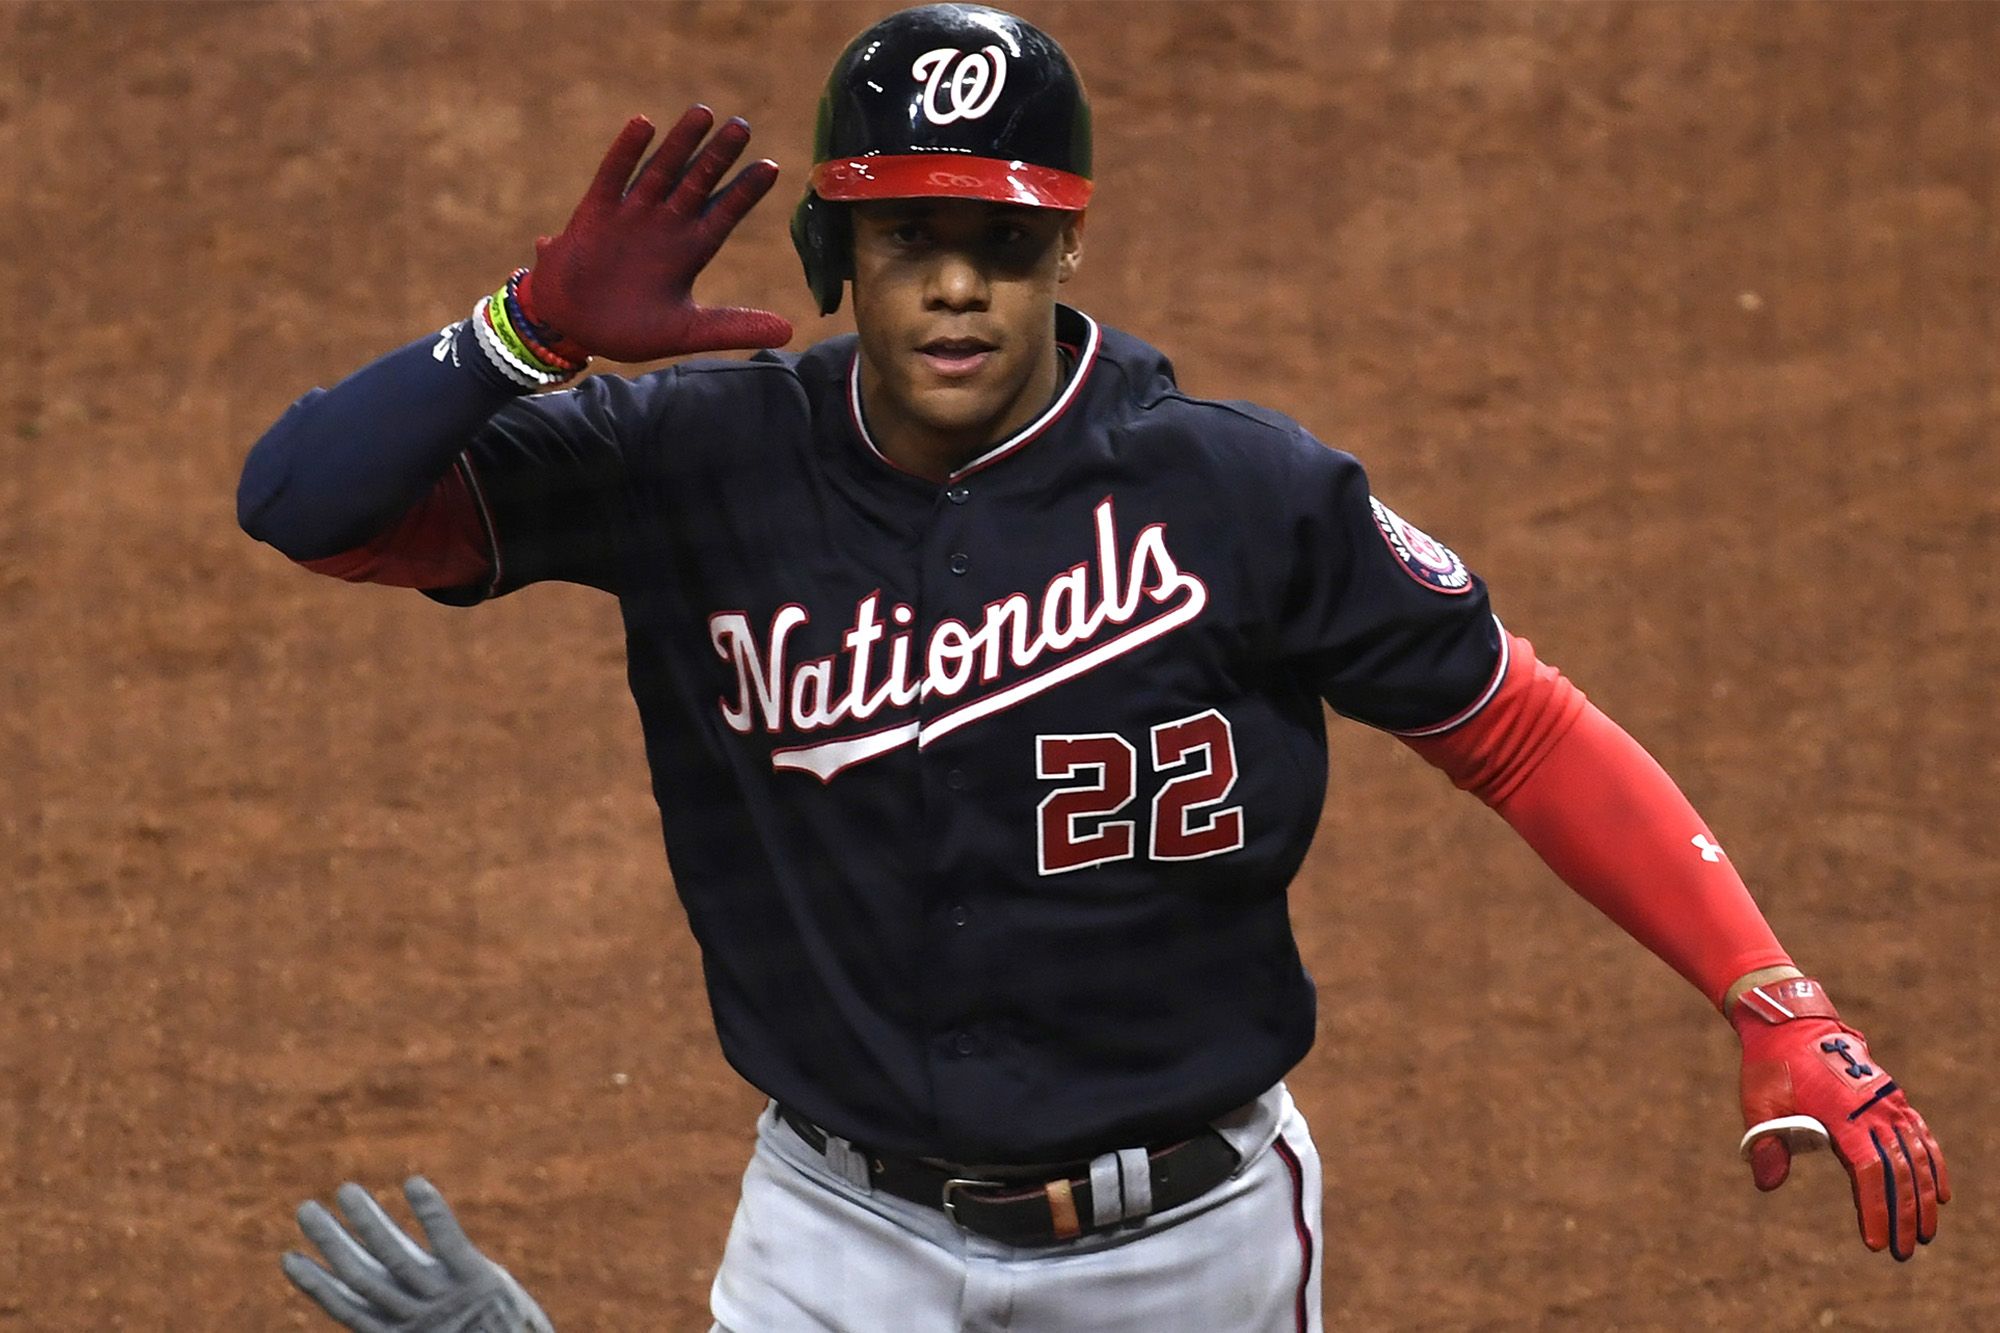 Washington Nationals news & notes: Not that play again! Davey Martinez  heated after Nats' 5-4 loss to Astros - Federal Baseball